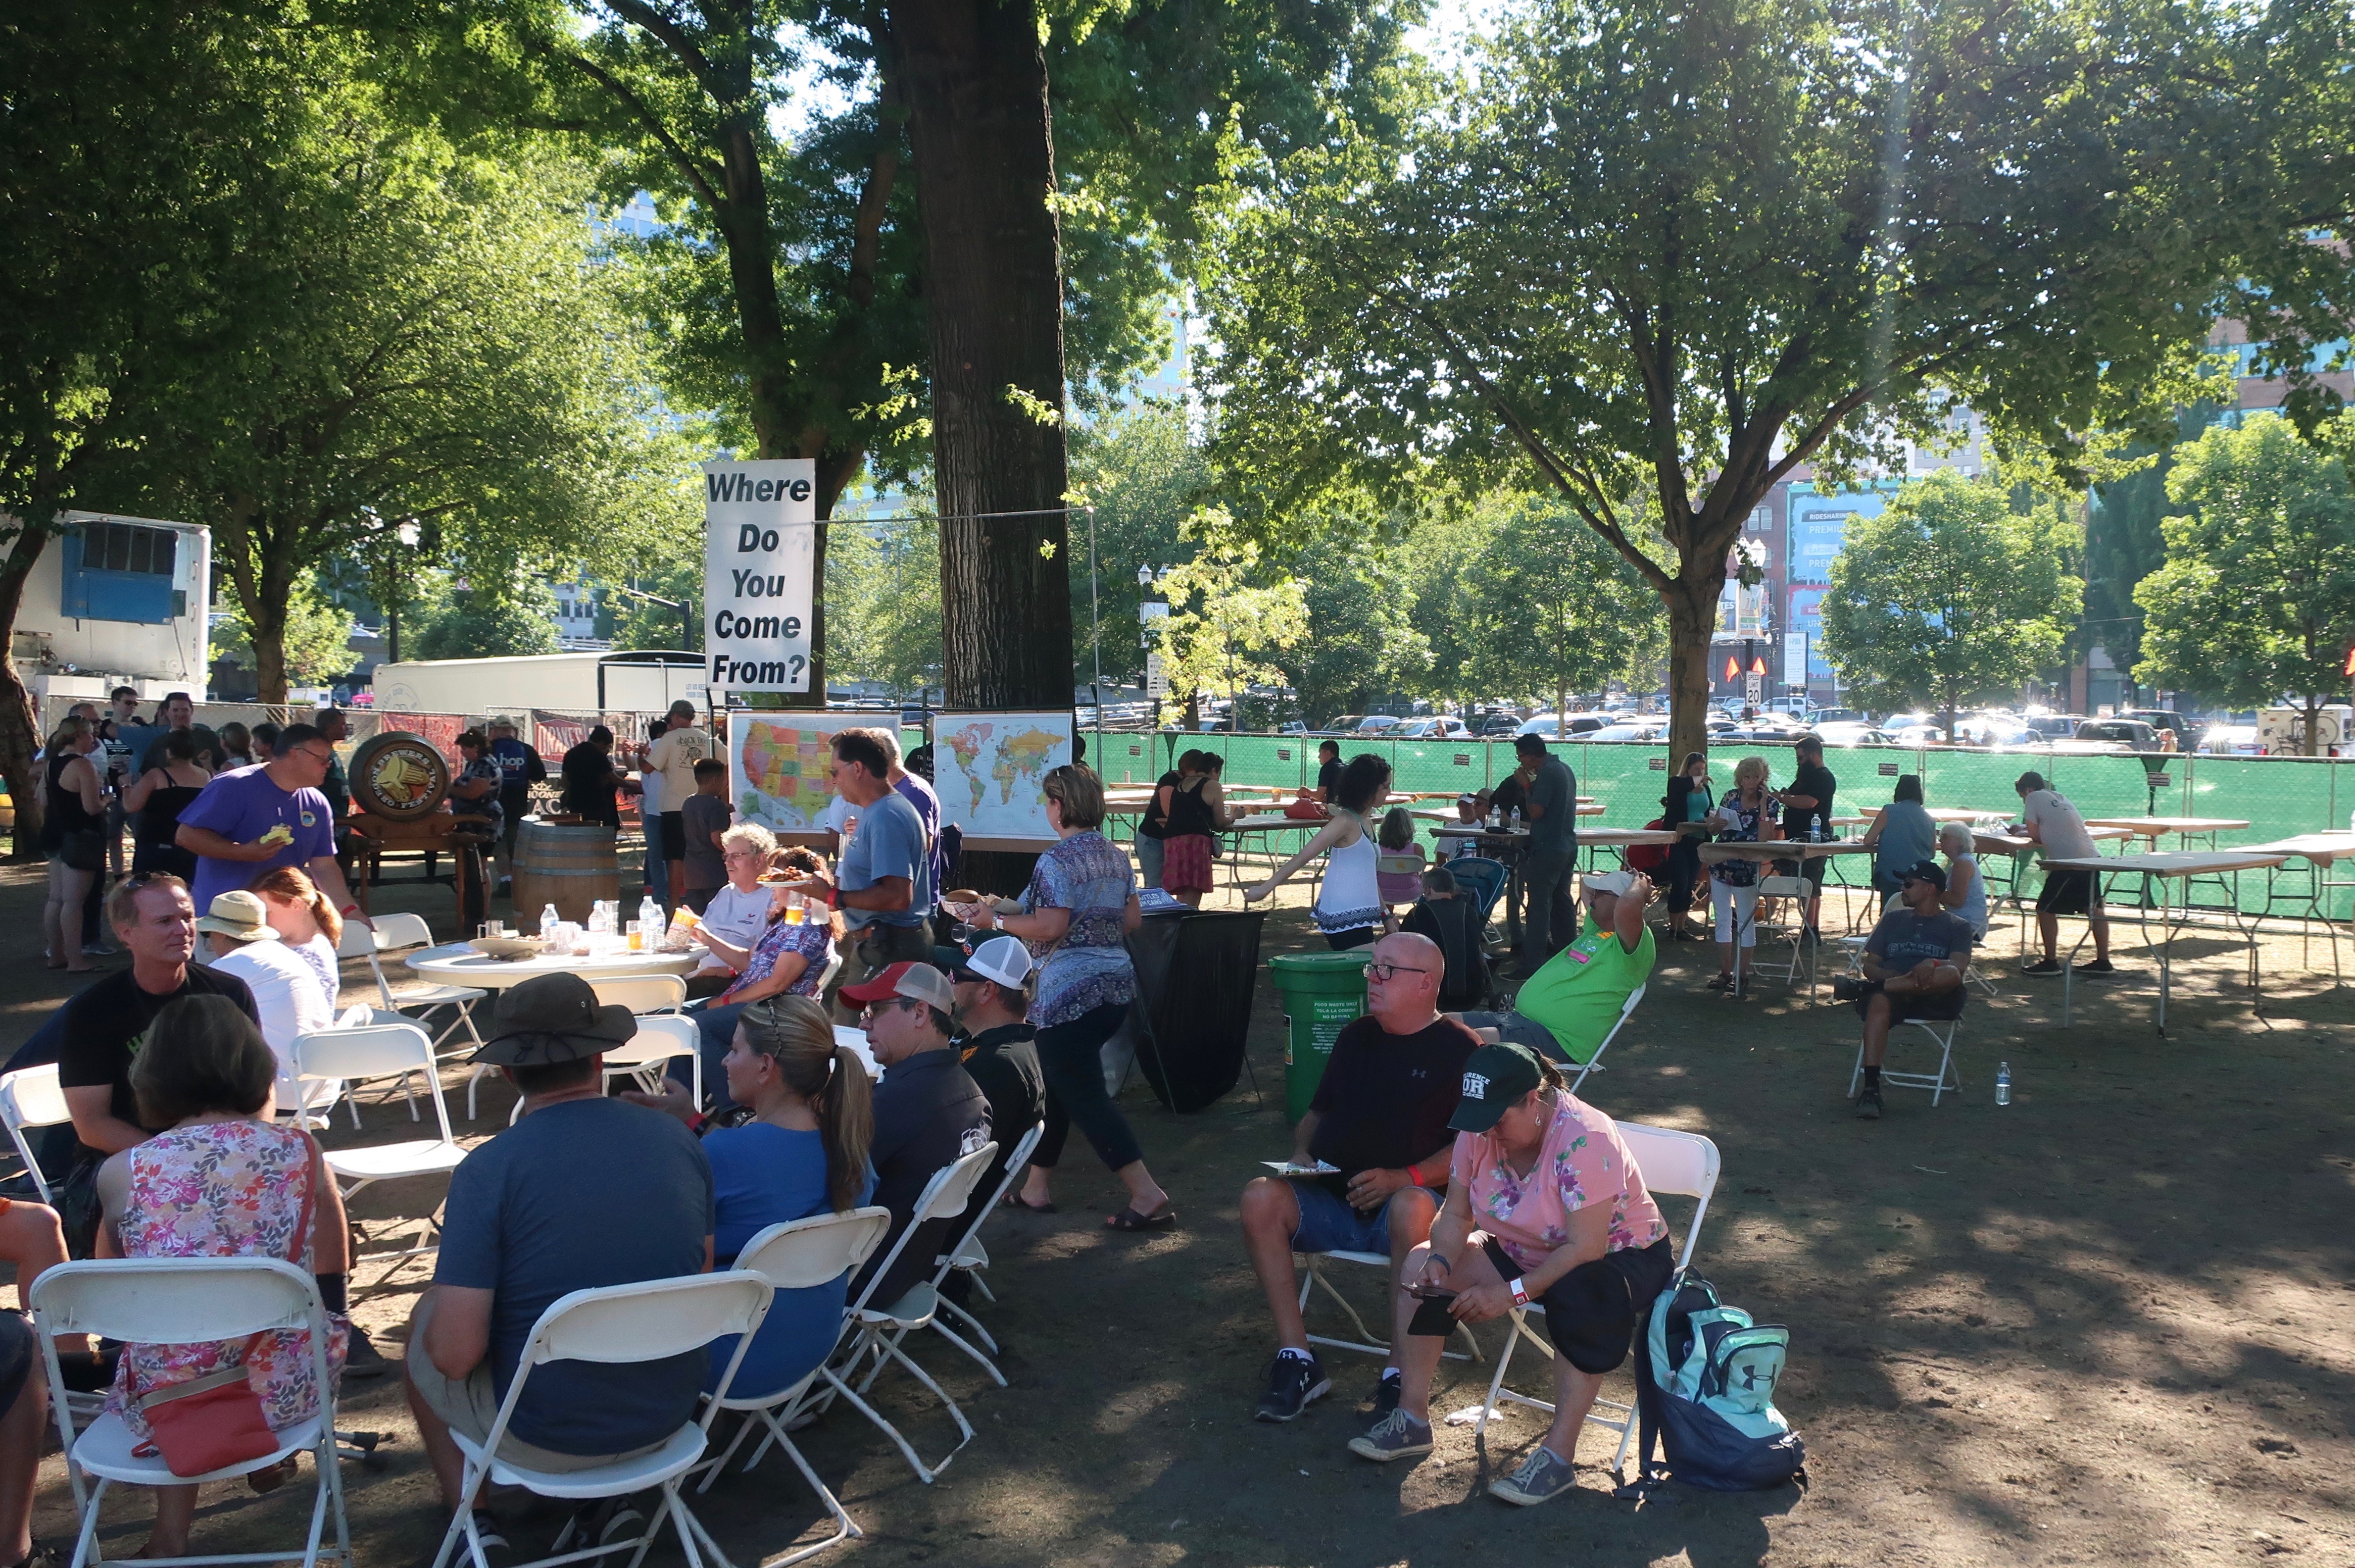 Plenty of shade to sit and relax at the 2018 Oregon Brewers Festival.